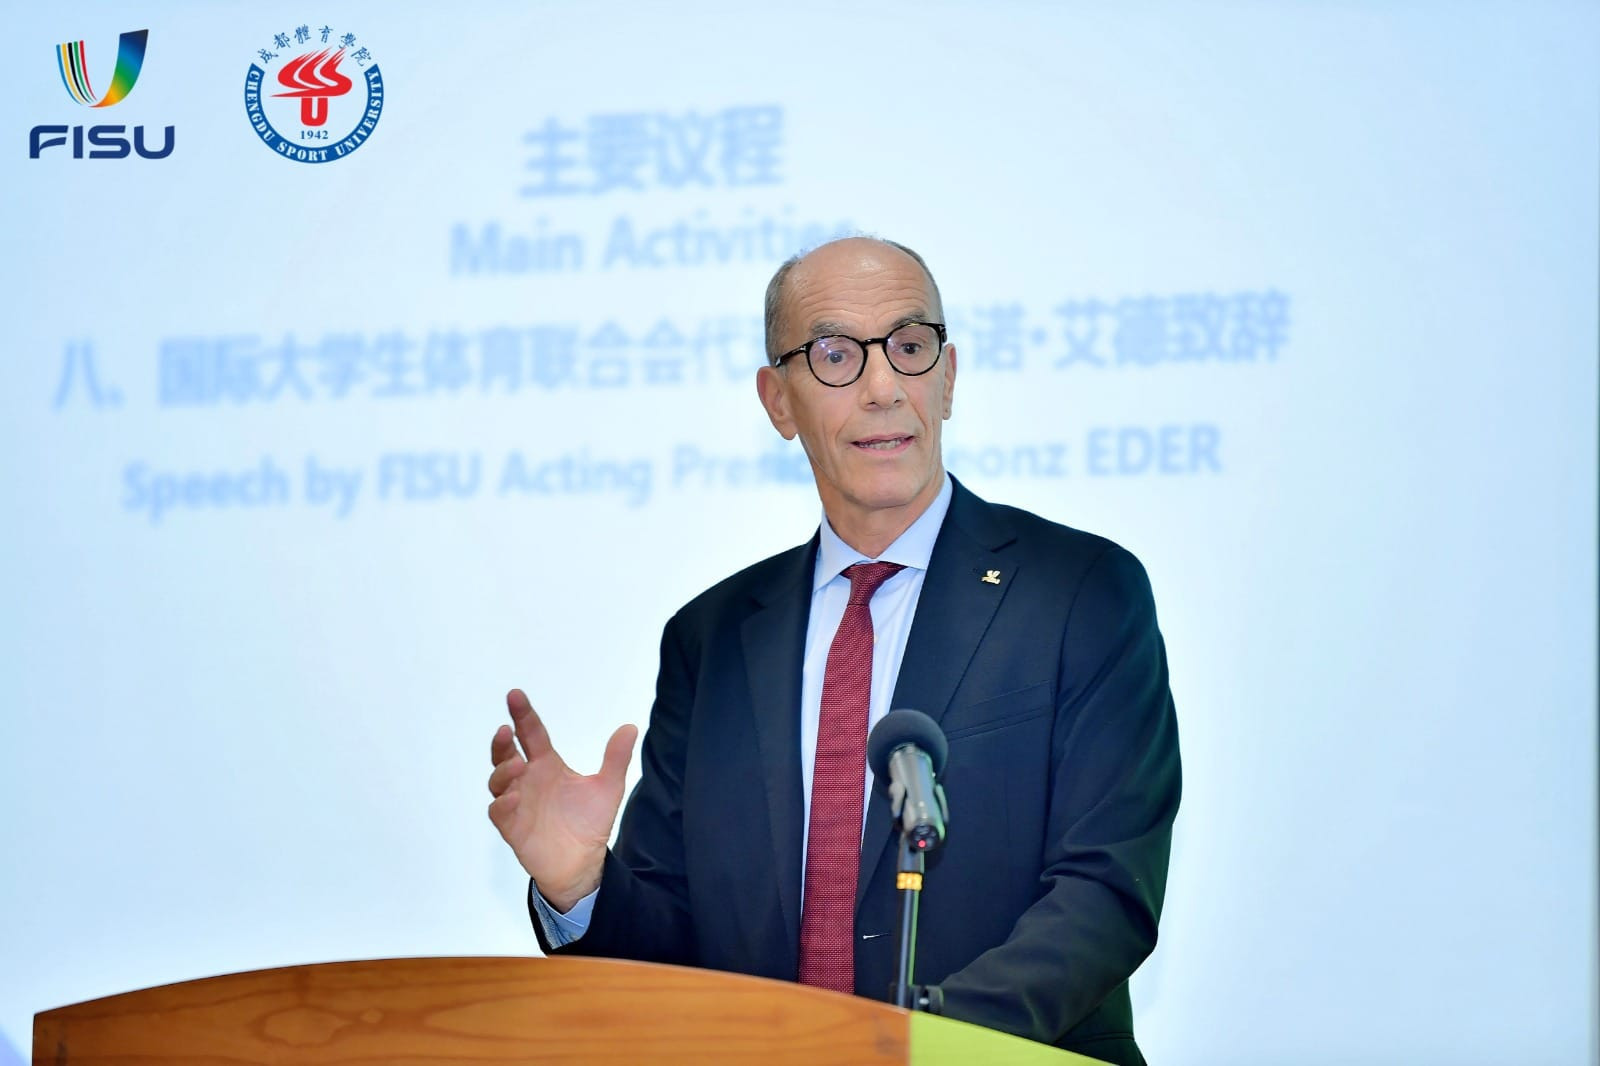 Leonz Eder: Chengdu 2021 allowed youth to come together to brighten and inspire our world